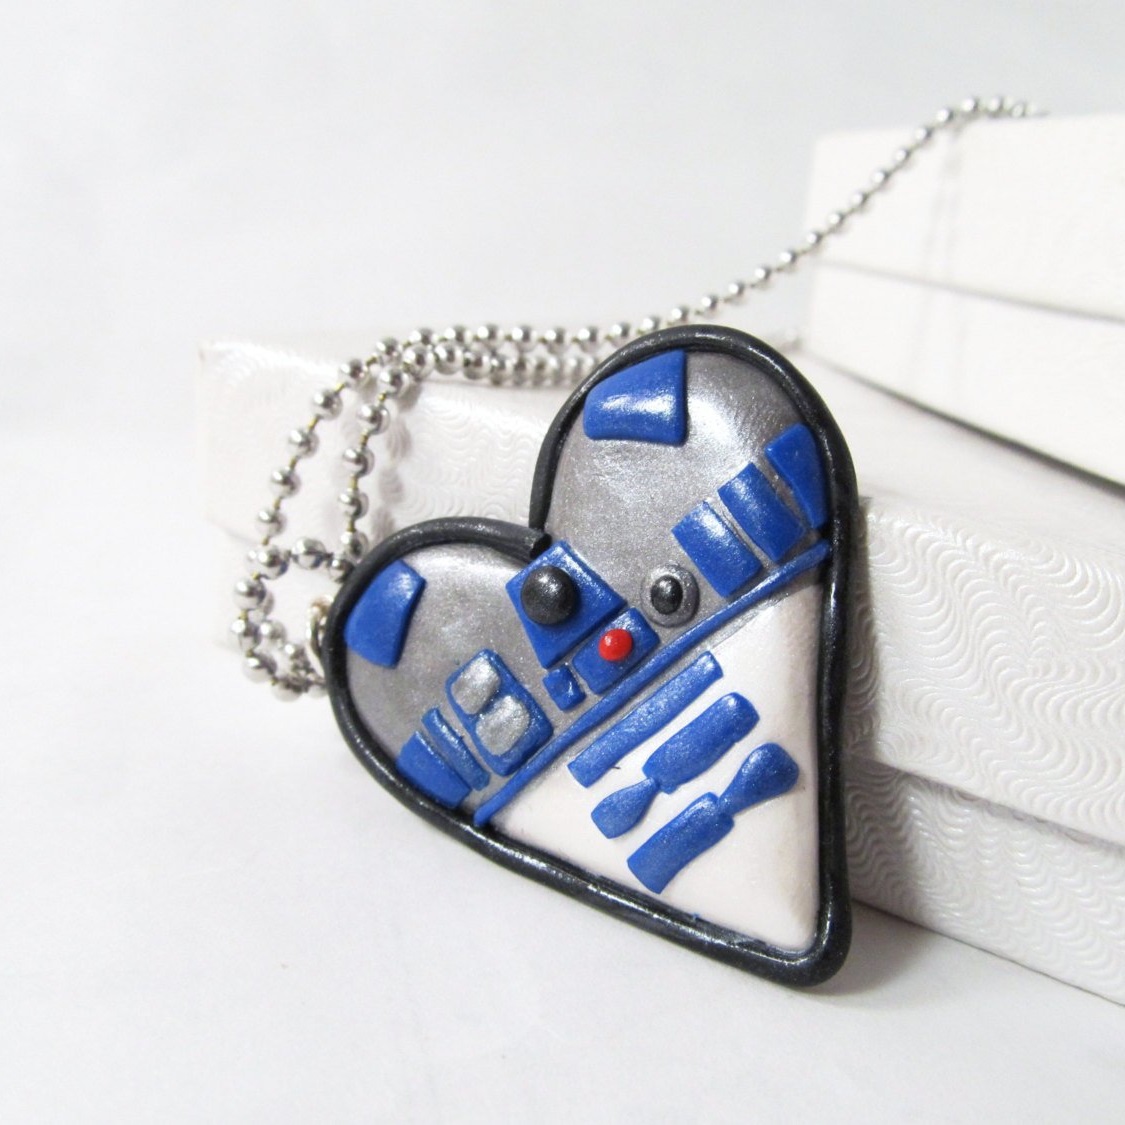 Star Wars Heart Shaped Necklace by Etsy Seller MissEsAccessories